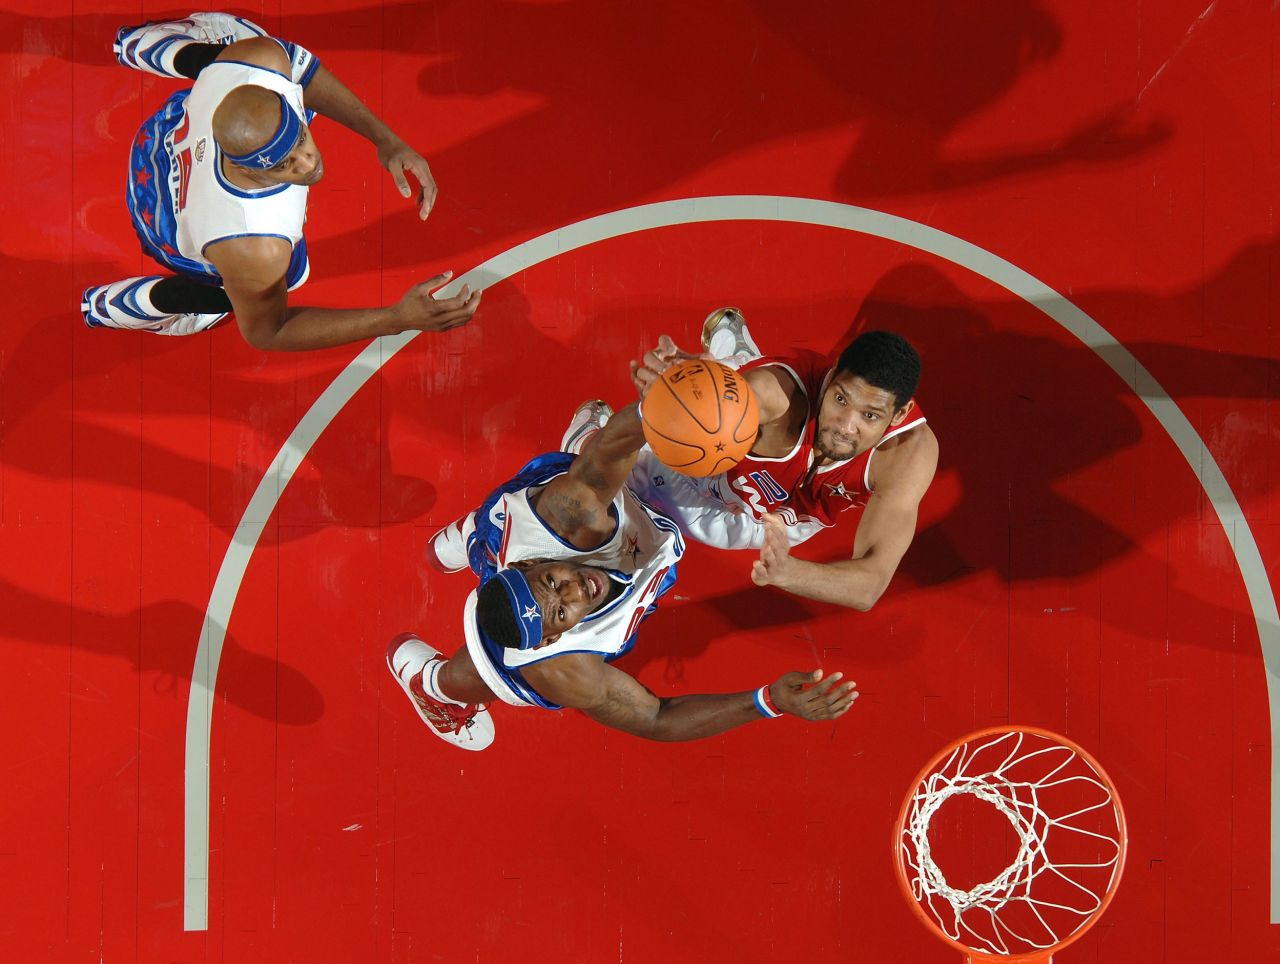 James, center, goes up for a rebound with Tim Duncan during the 2006 NBA All-Star Game. He was named the game's most valuable player — the youngest to ever receive the award.